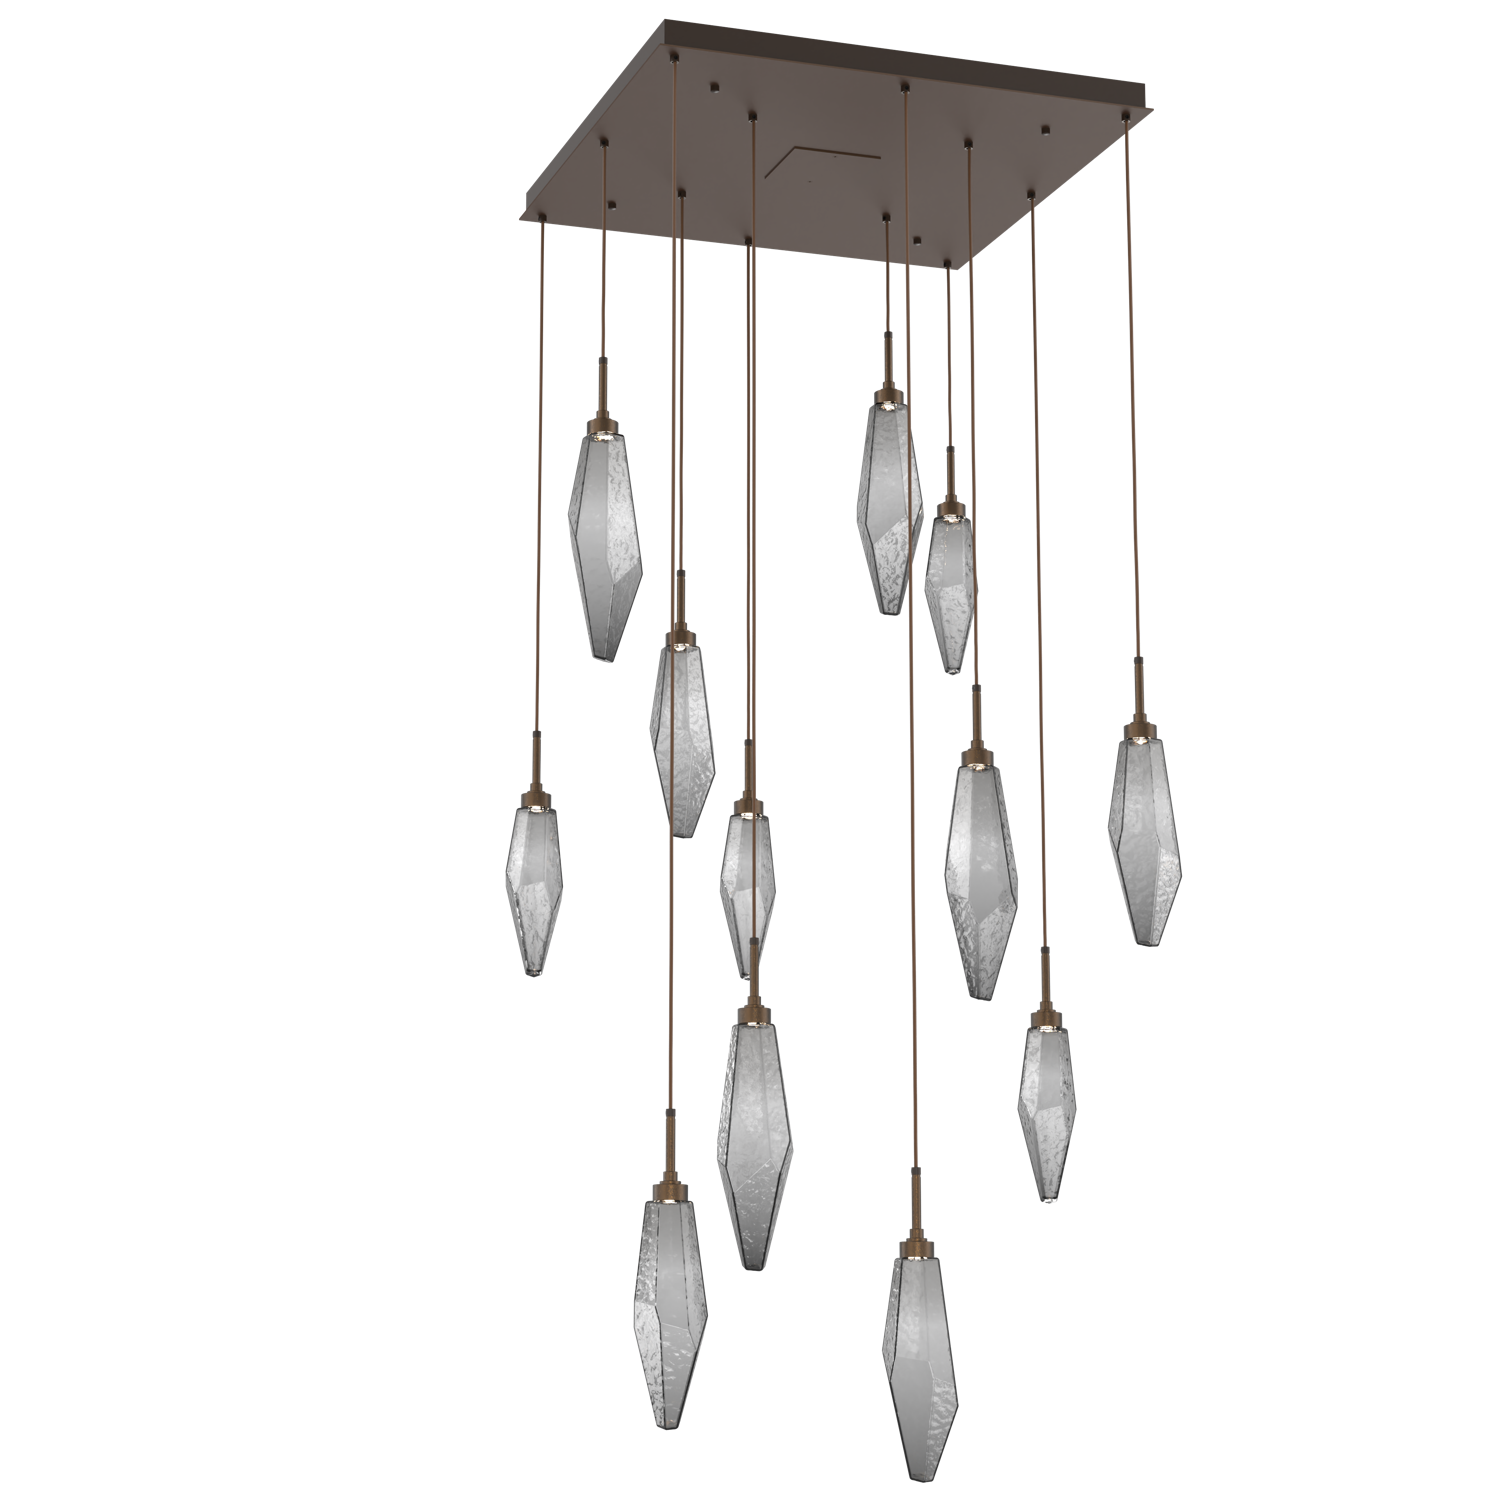 CHB0050-12-FB-CS-Hammerton-Studio-Rock-Crystal-12-light-square-pendant-chandelier-with-flat-bronze-finish-and-chilled-smoke-glass-shades-and-LED-lamping